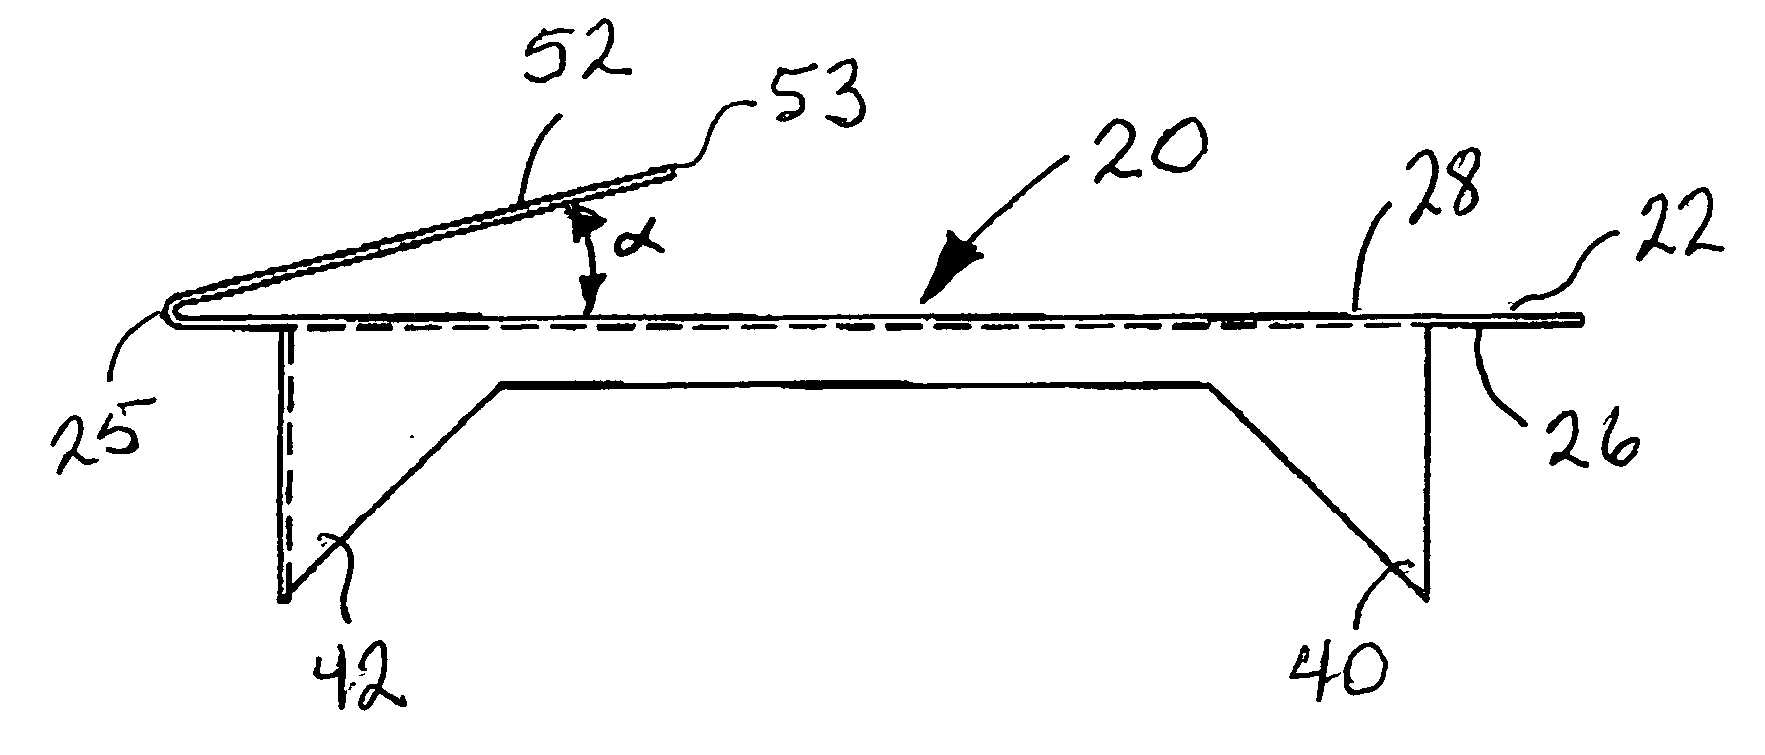 Spring clip and method of window installation